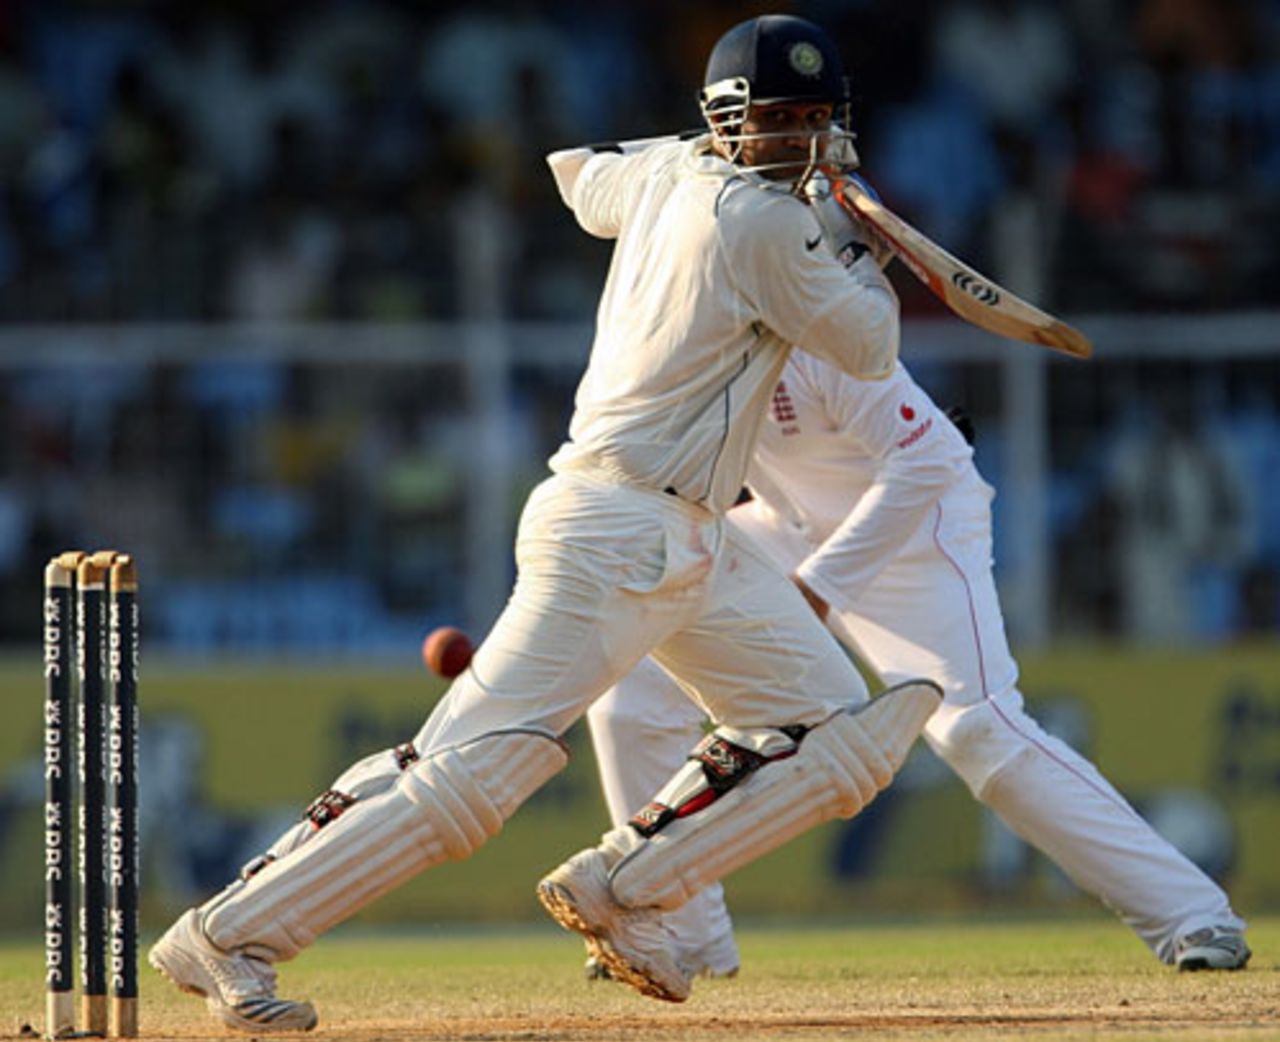 Virender Sehwag guides one towards the third-man boundary, India v England, 1st Test, Chennai, 4th day, December 14, 2008